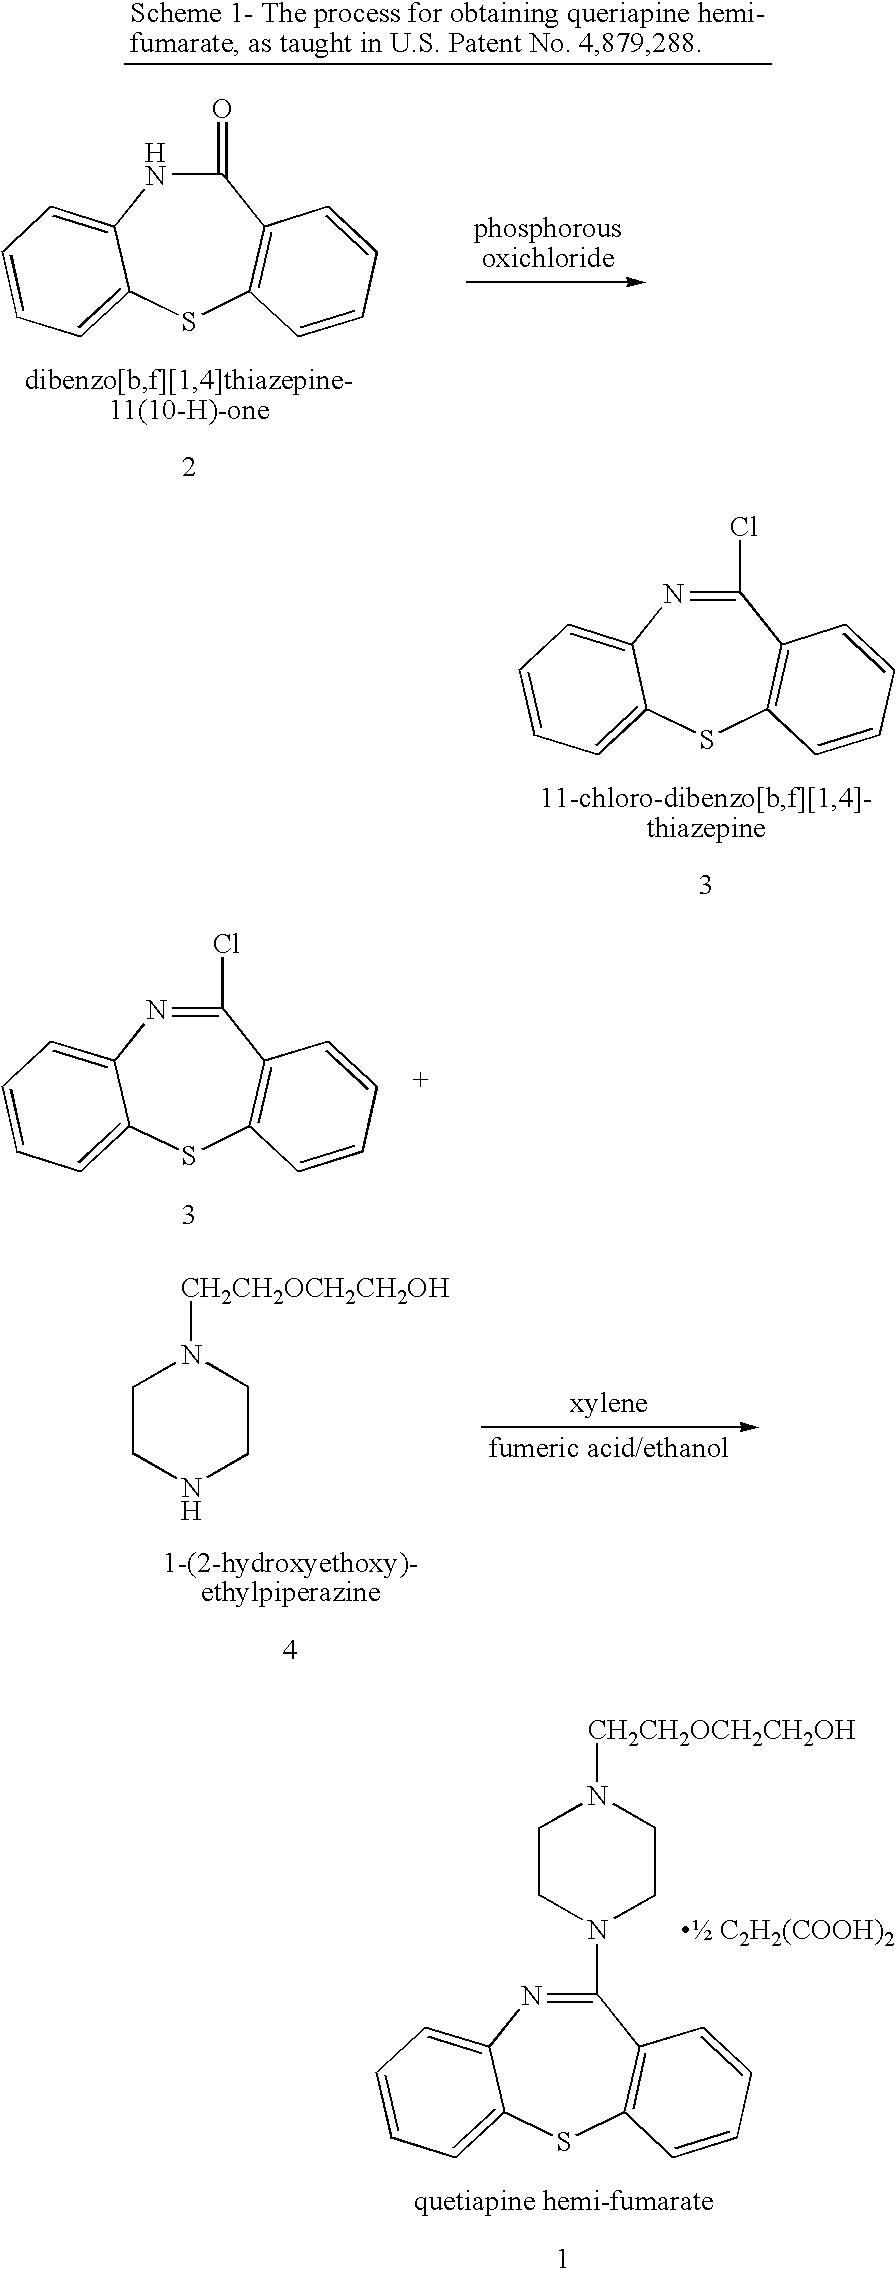 Processes for preparing quetiapine and salts thereof